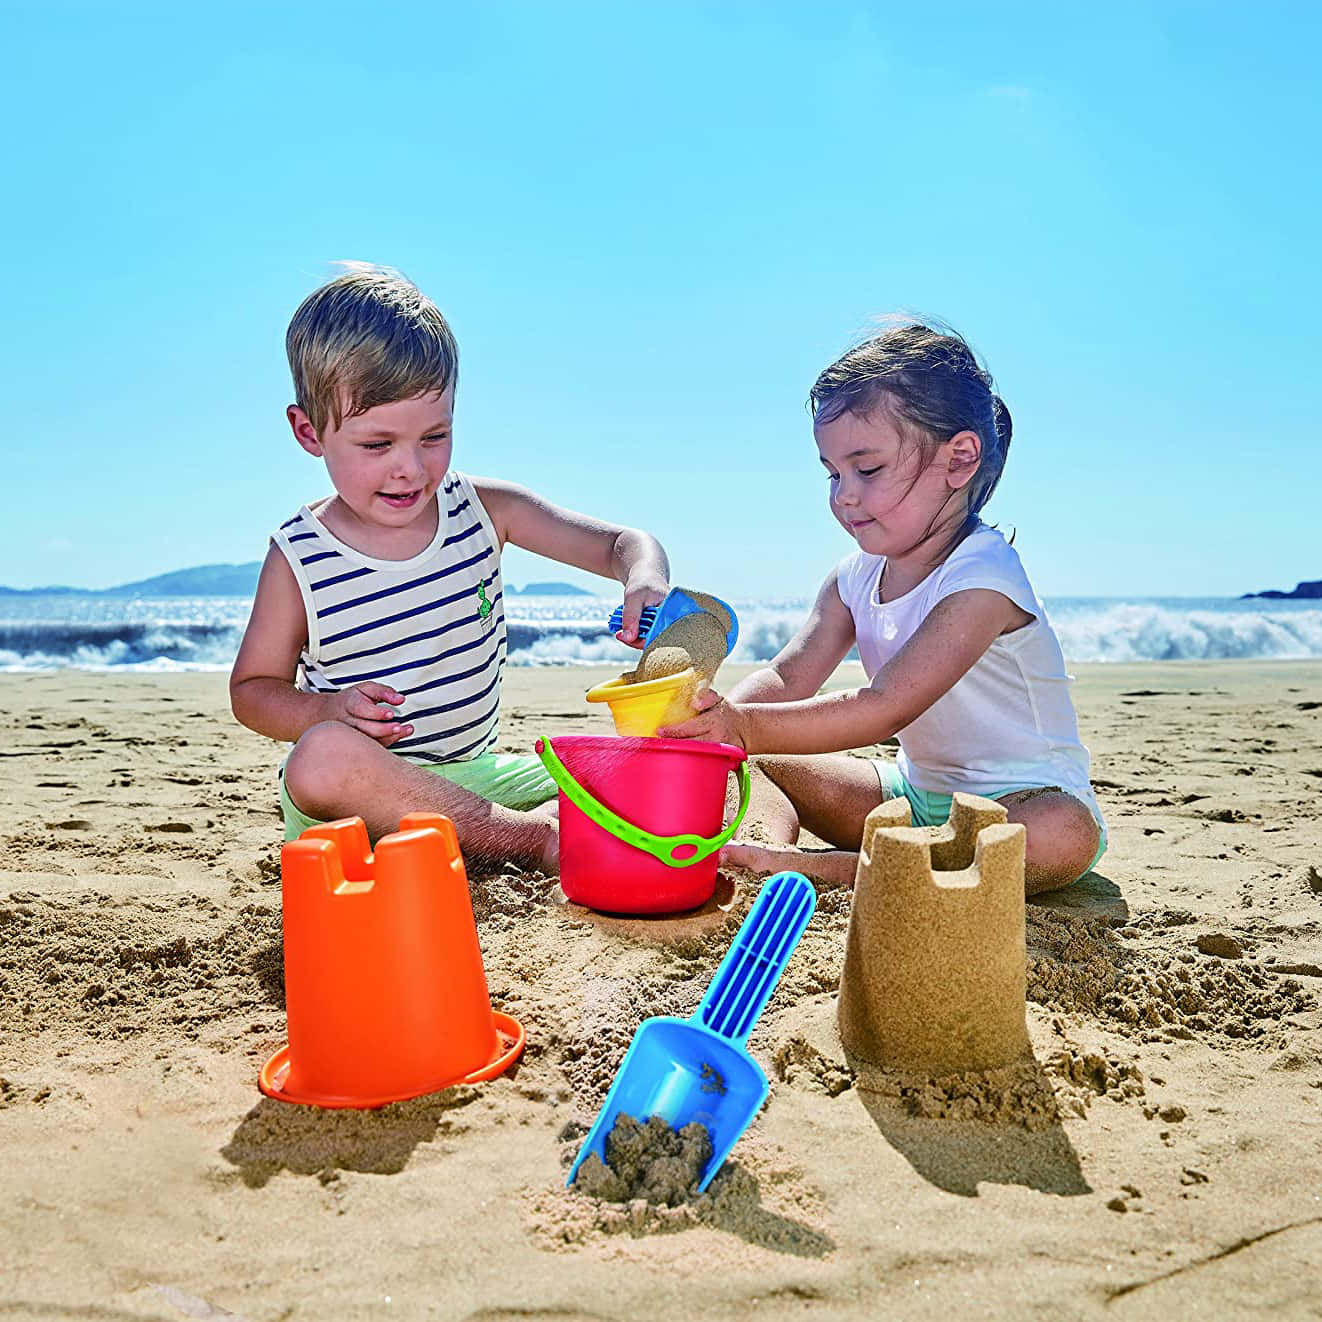 Colorful Beach Toys on Sandy Shore Wallpaper